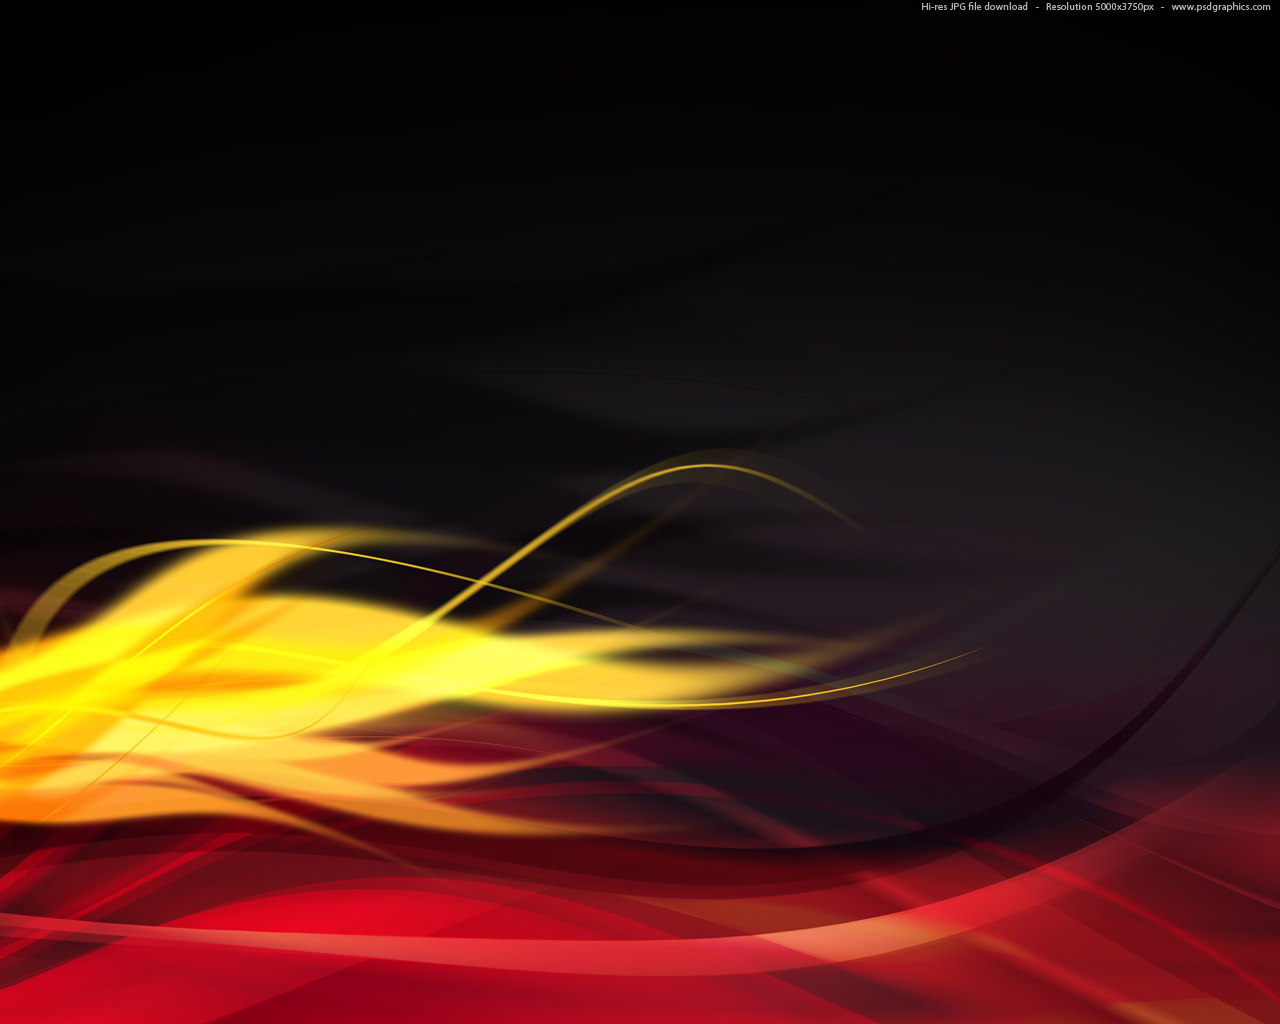 Medium size preview 1280x1024px Hot flames background